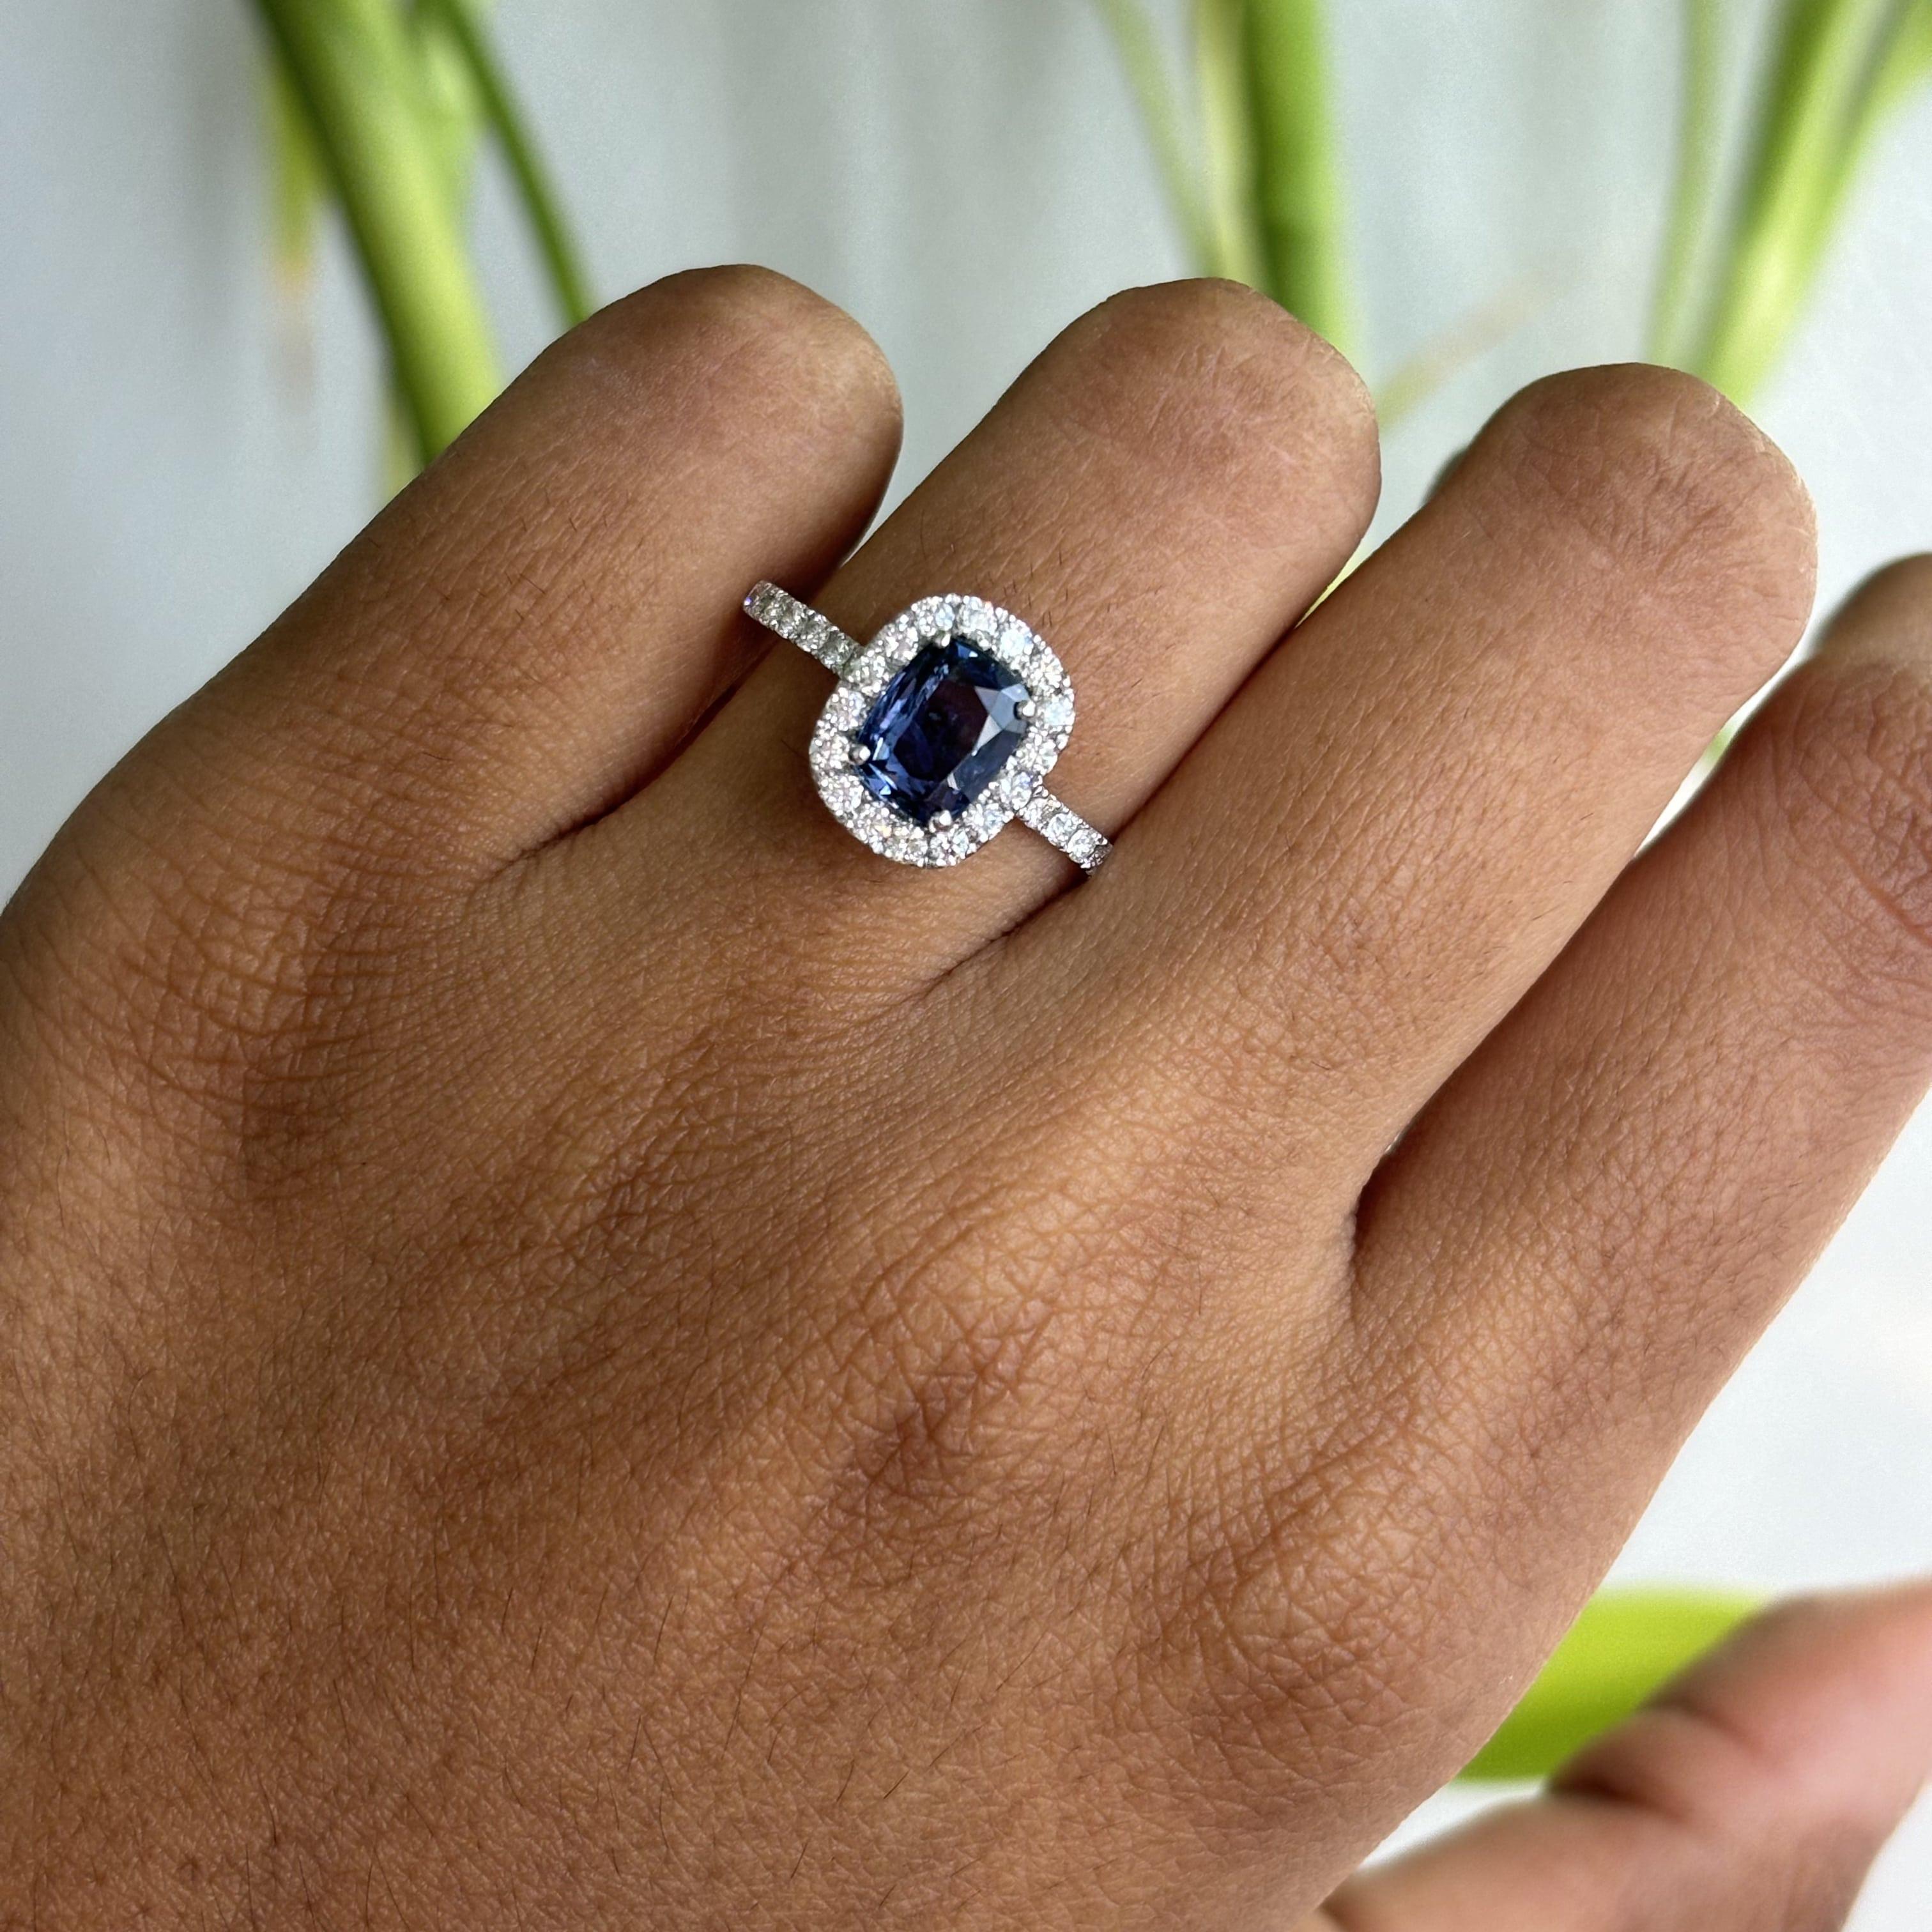 Cushion Cut 1.21 Carat Ceylon Blue Sapphire Ring with Halo Diamonds in 14K White Gold For Sale